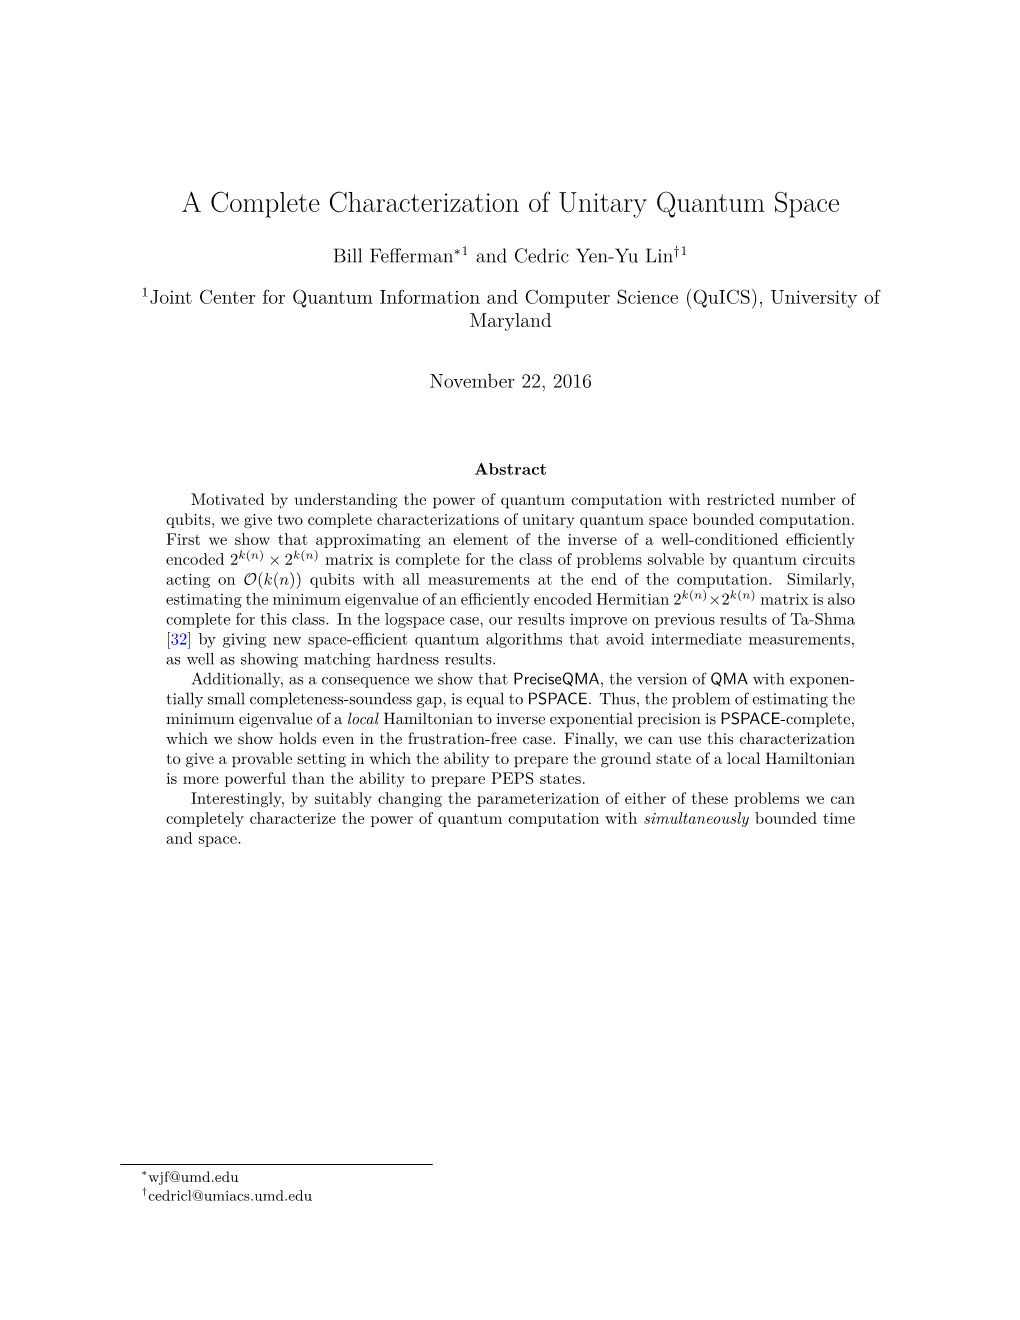 A Complete Characterization of Unitary Quantum Space